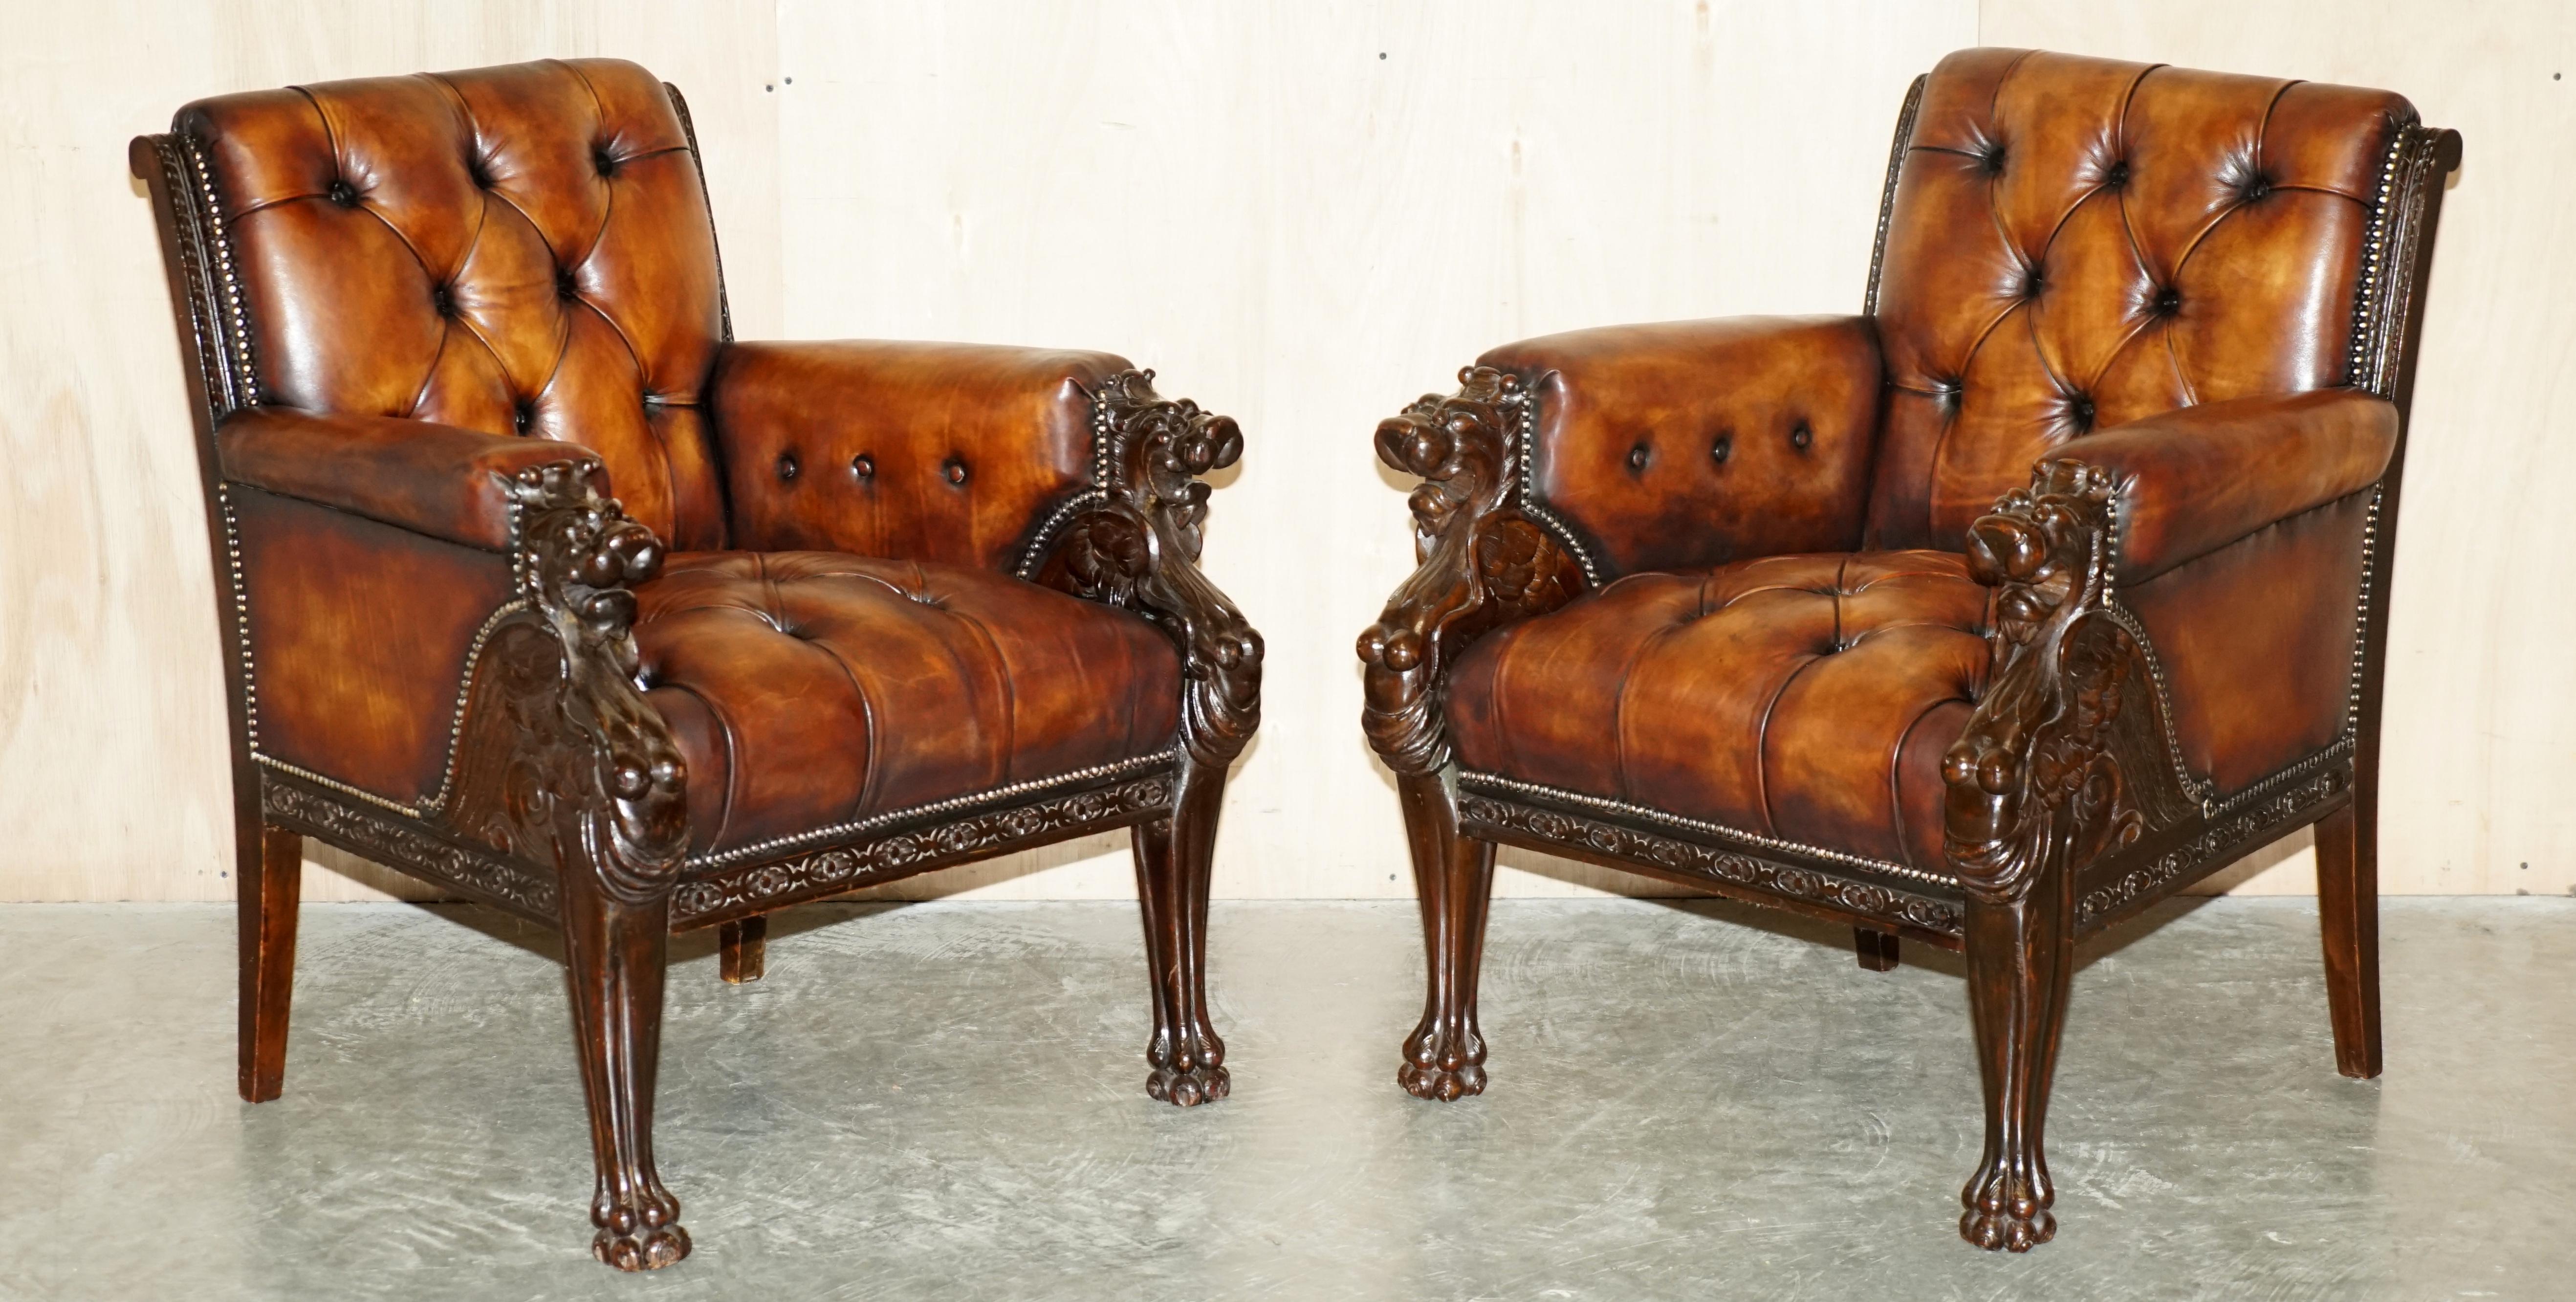 RESTORED ANTIQUE LiON HAND CARVED BROWN LEATHER CHESTERFIELD SOFA ARMCHAIR SUITE im Angebot 6